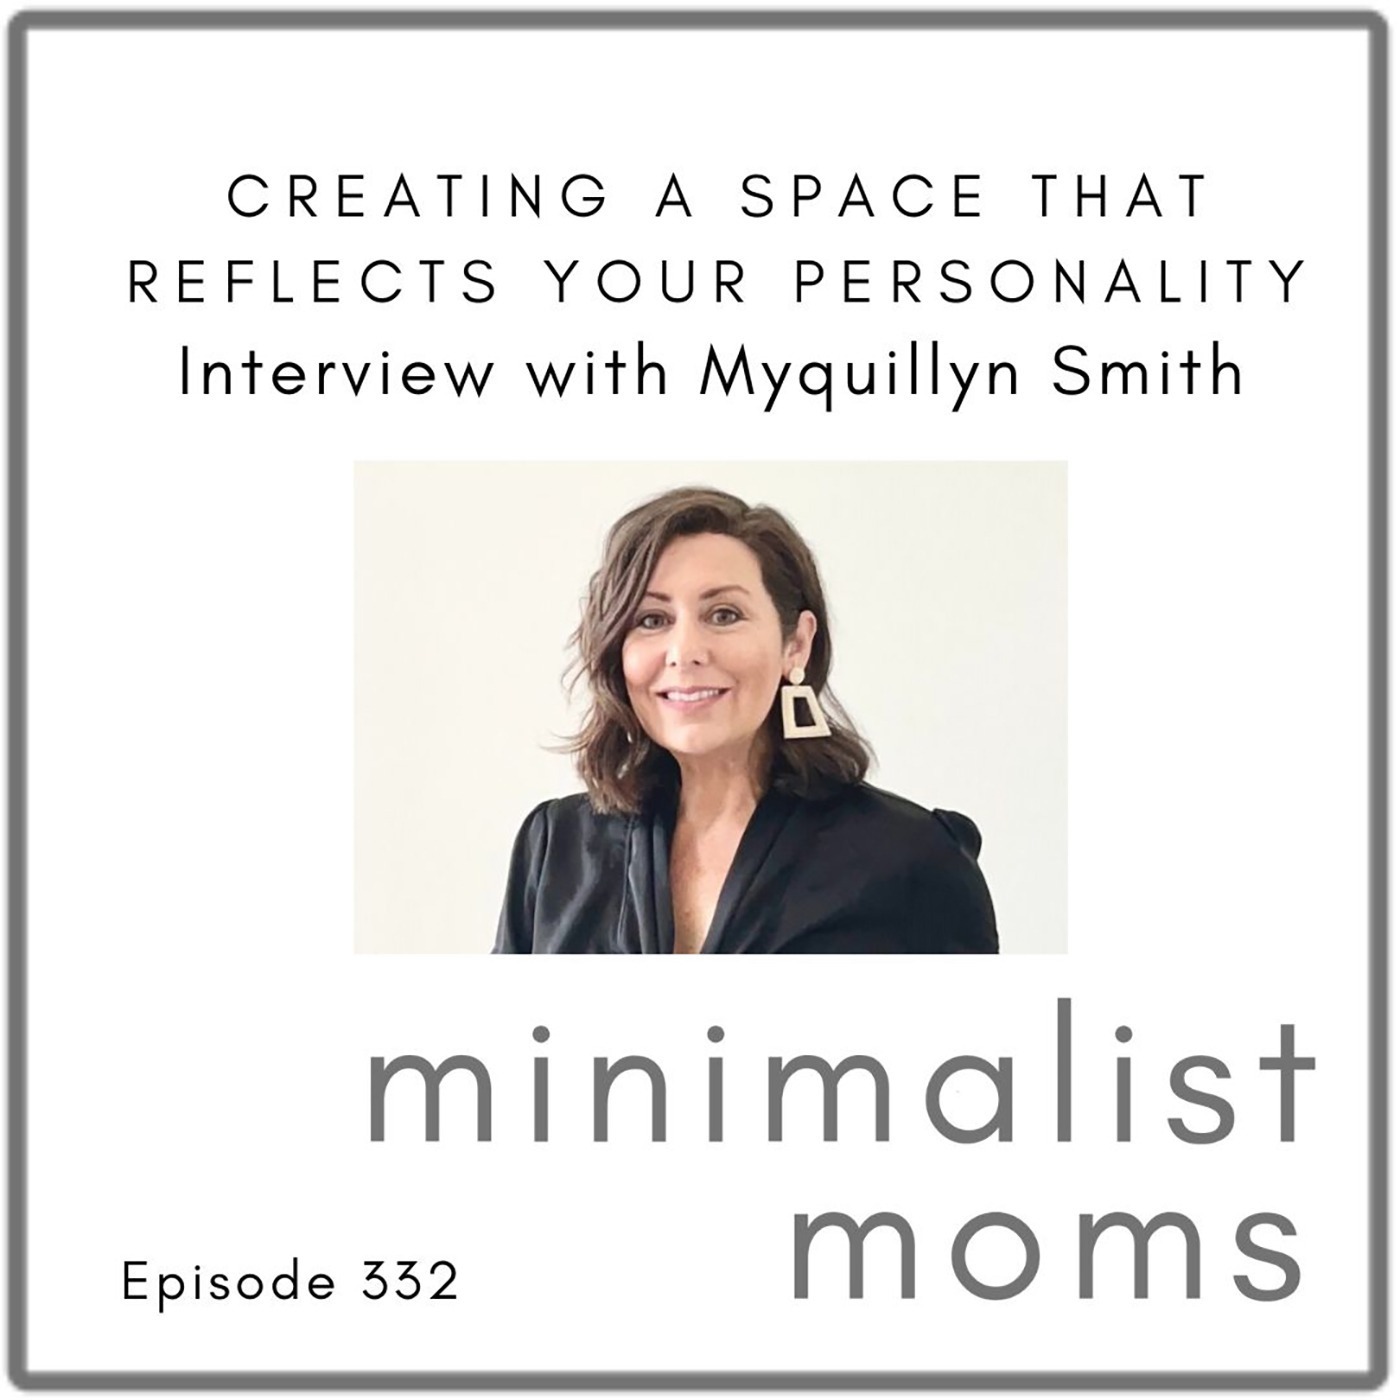 Creating a Space That Reflects YOUR Personality with Myquillyn Smith